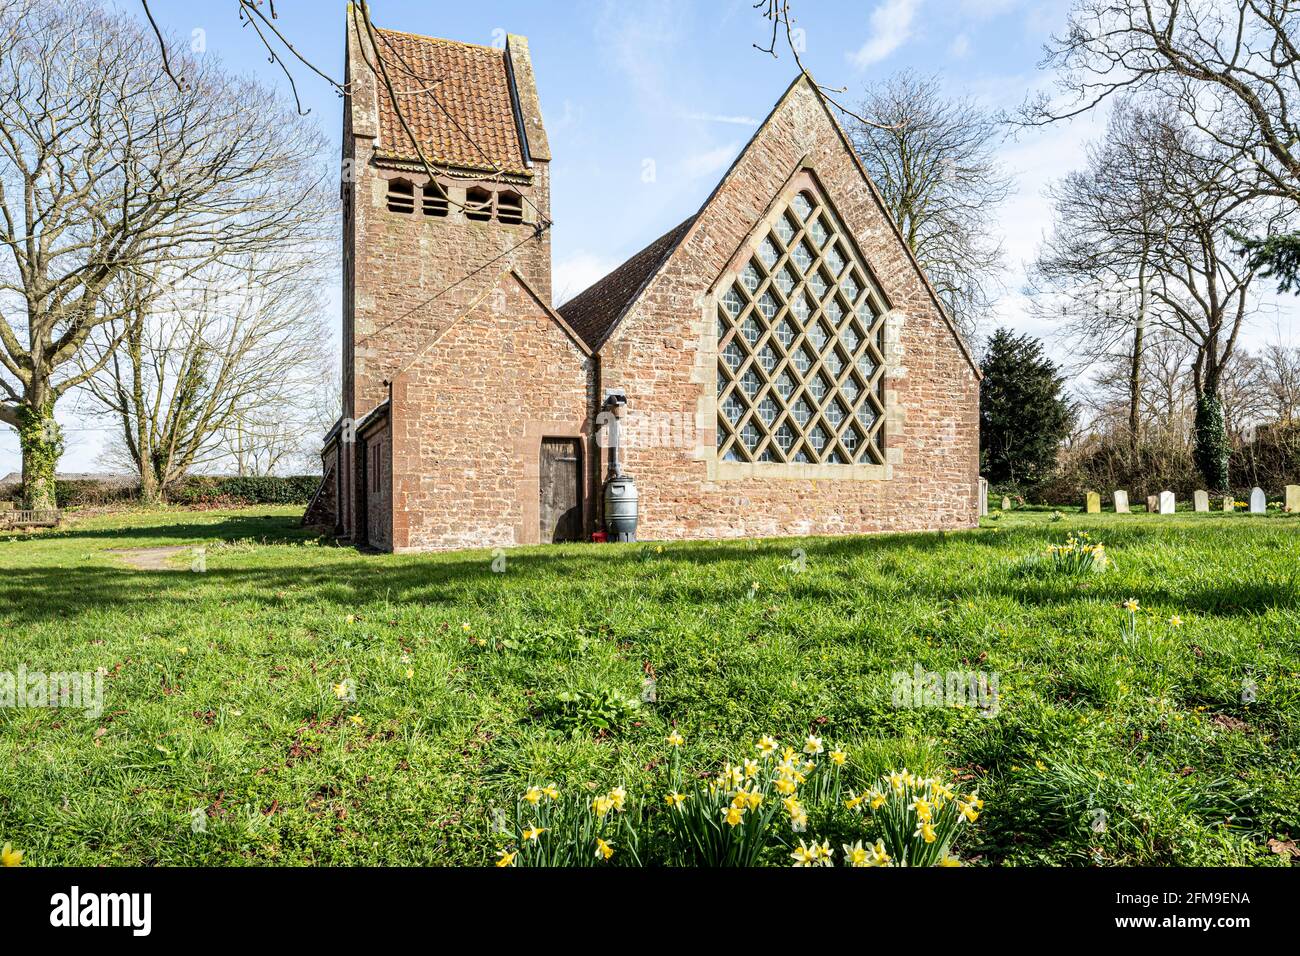 The 20th century Arts & Crafts Movement church of St Edward built of local red sandstone in the village of Kempley, Gloucestershire UK Stock Photo